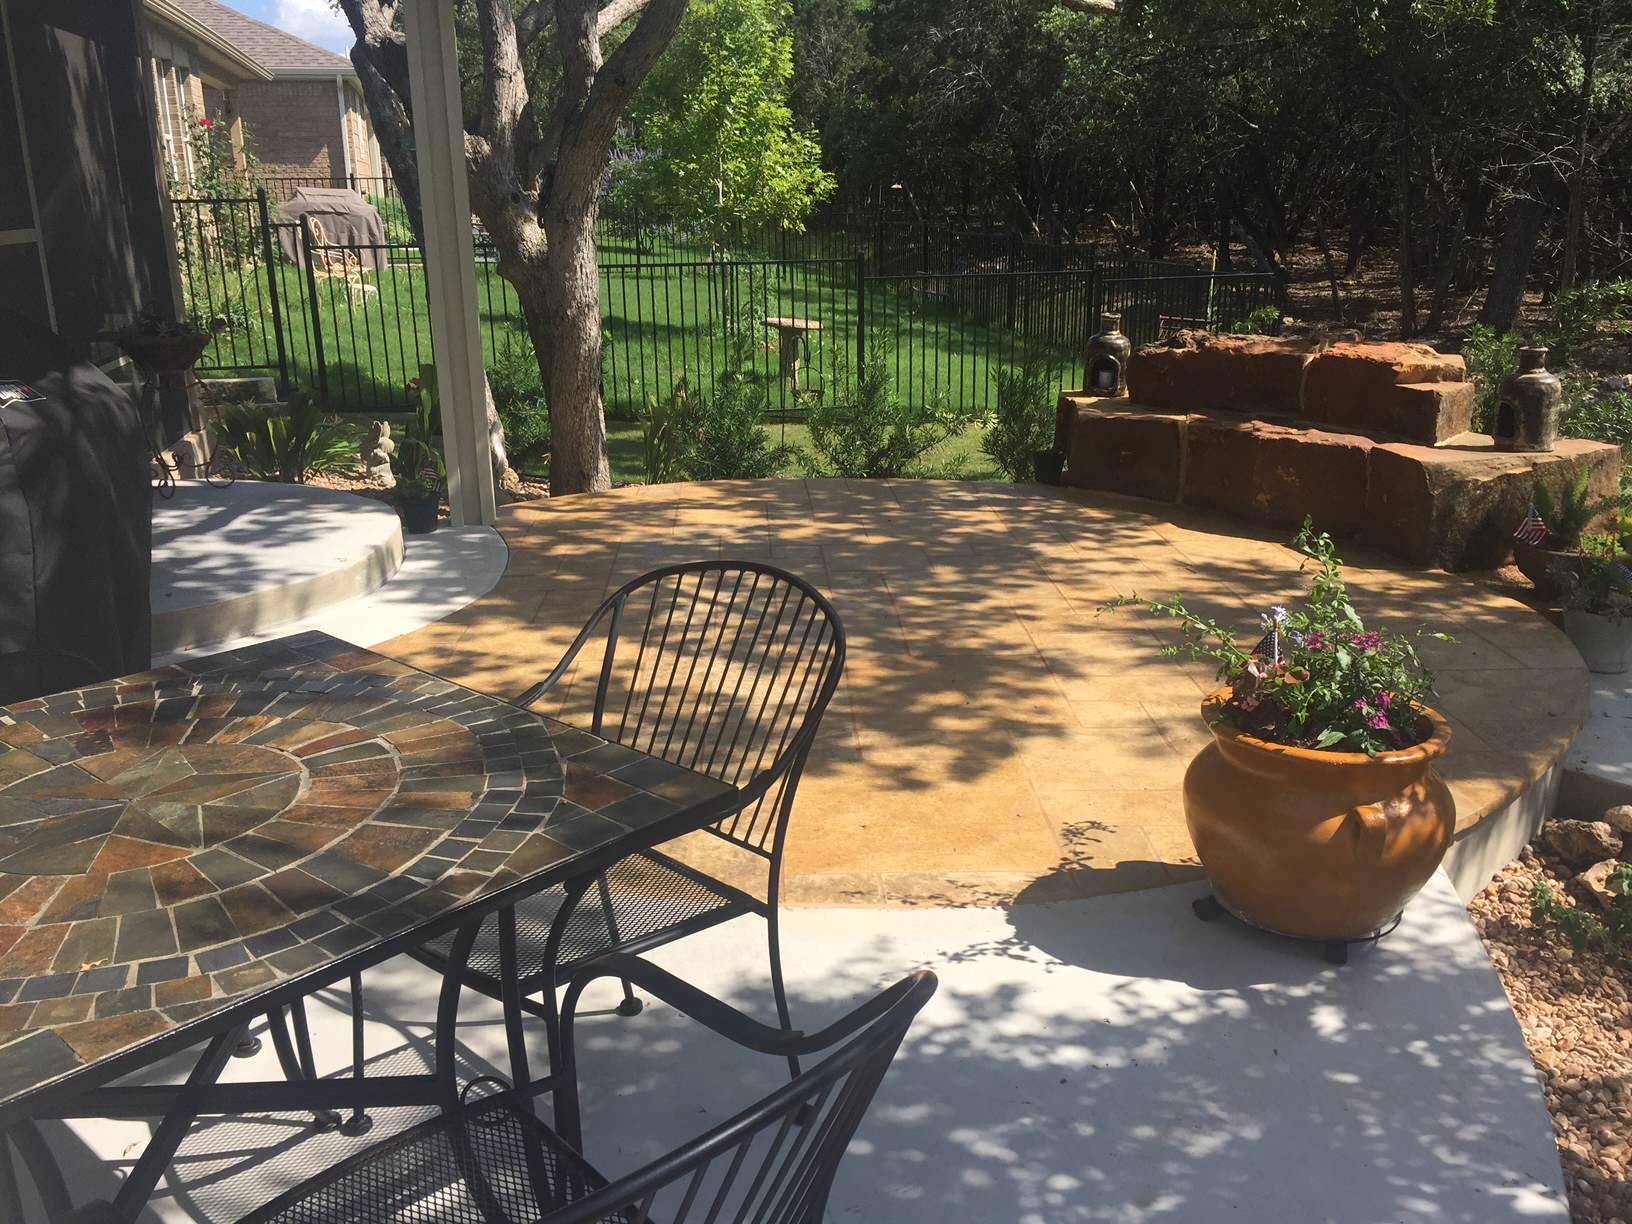 New concrete w/ stained leuders patio, large custom sandstone boulders